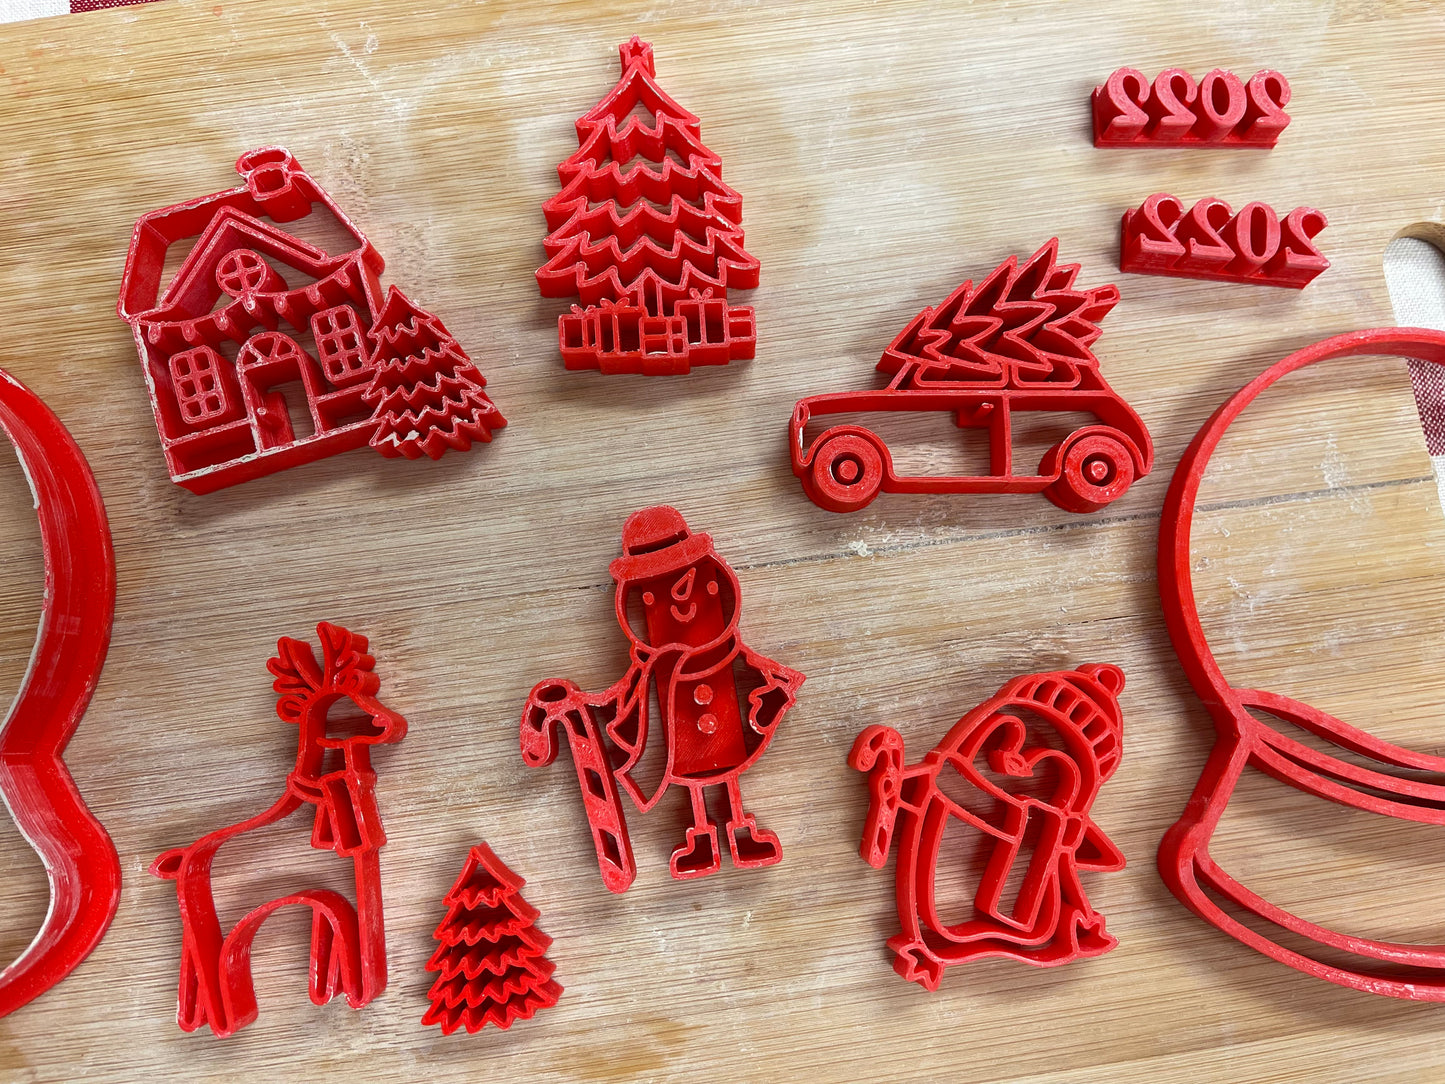 Pottery Stamp, Christmas Snow Globe designs, with multiple designs and optional cookie cutter ornament, as a set or individual - multiple sizes